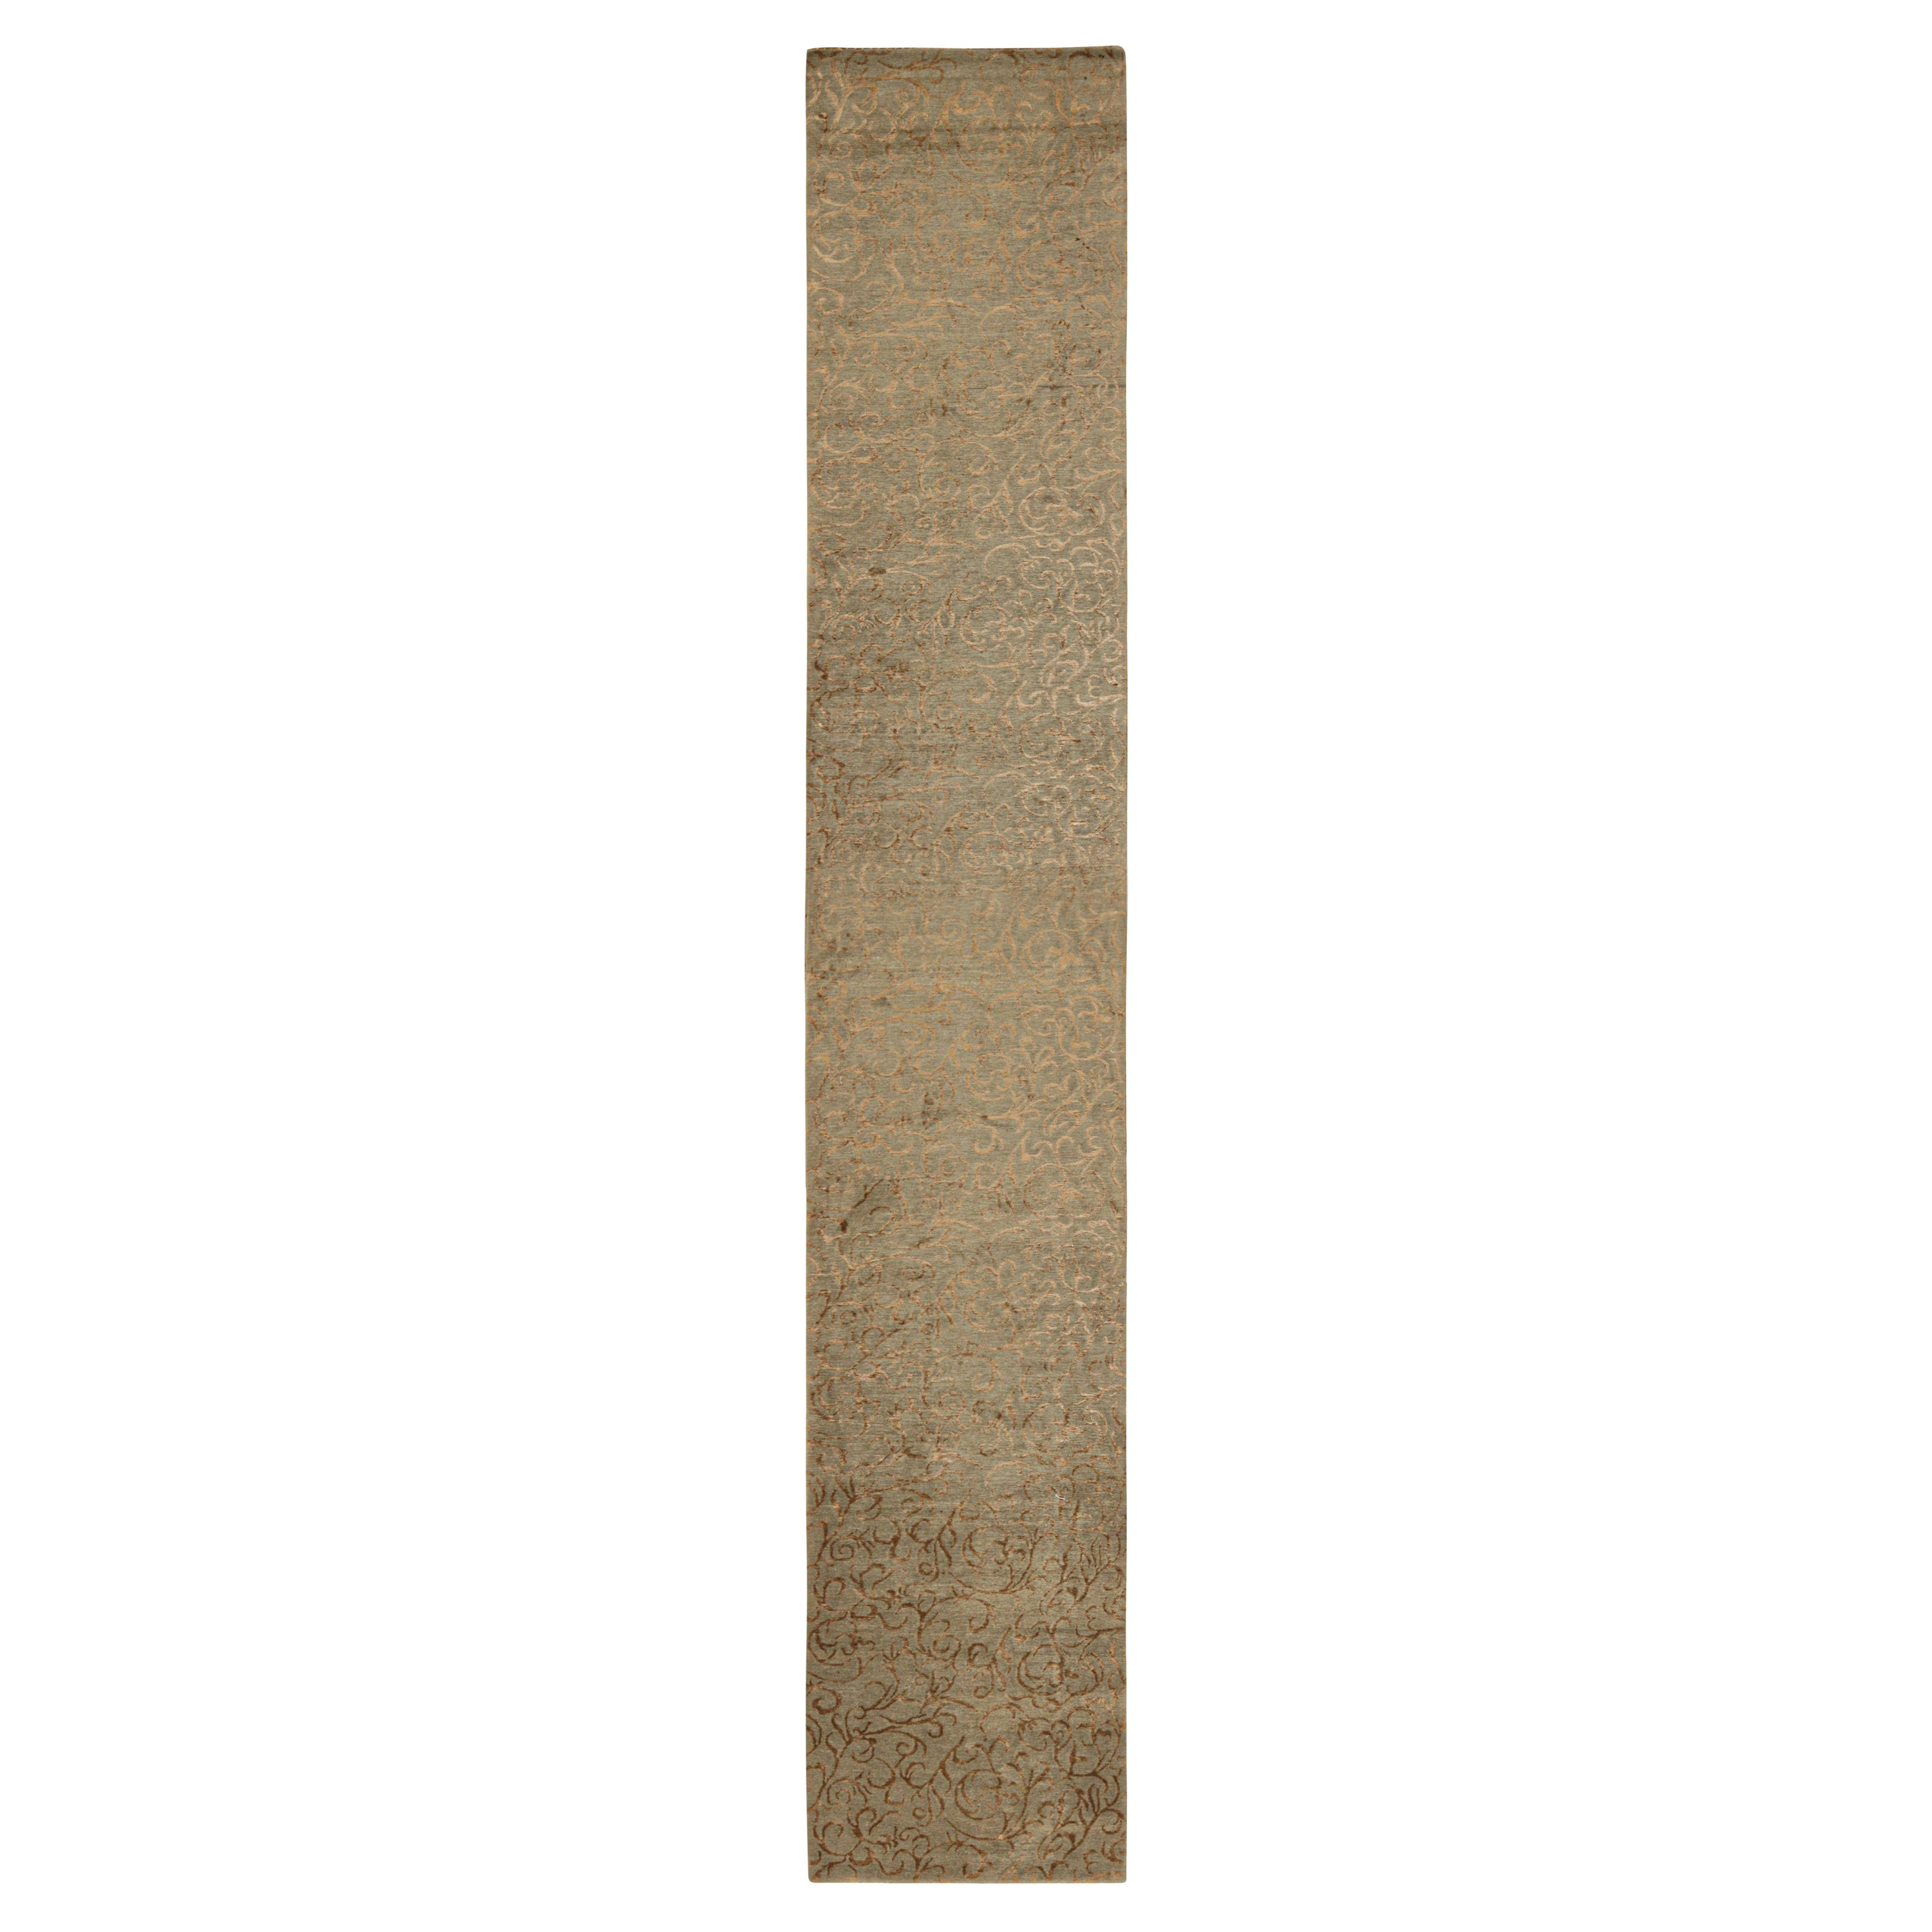 Rug & Kilim’s European Style Runner in Beige-Brown All over Pattern For Sale